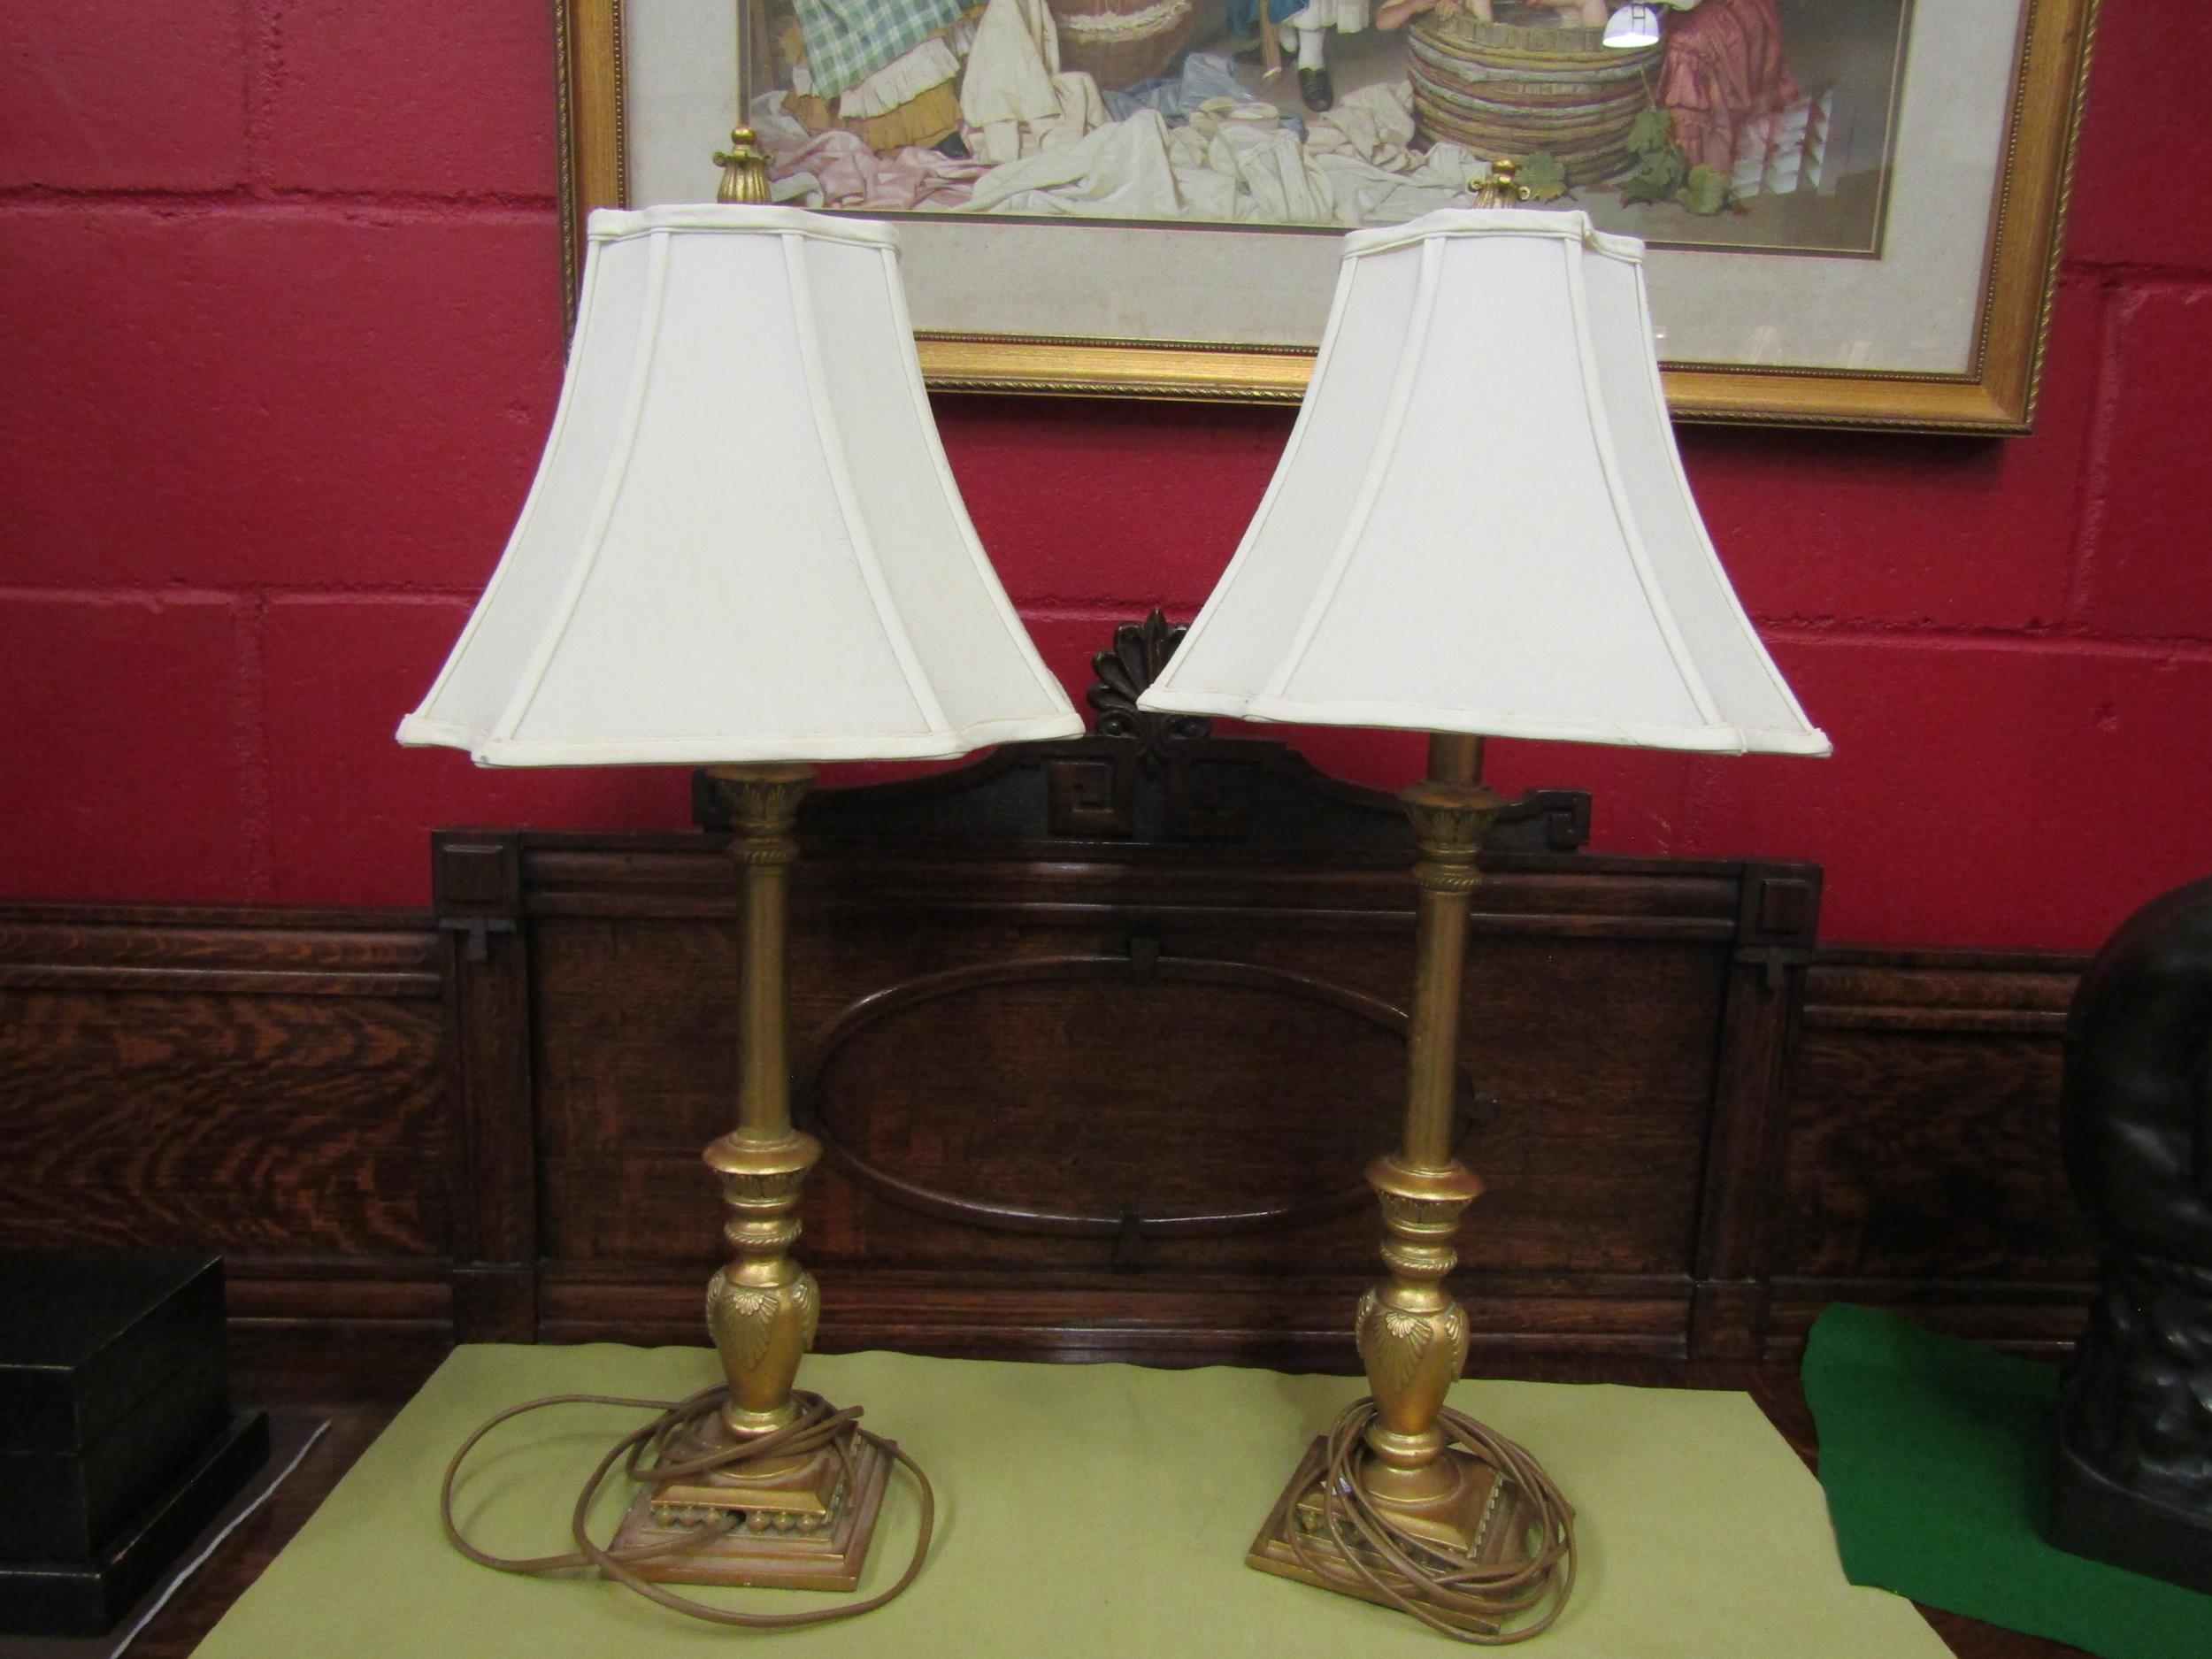 A pair of decorative gilt table lamps with cream shades